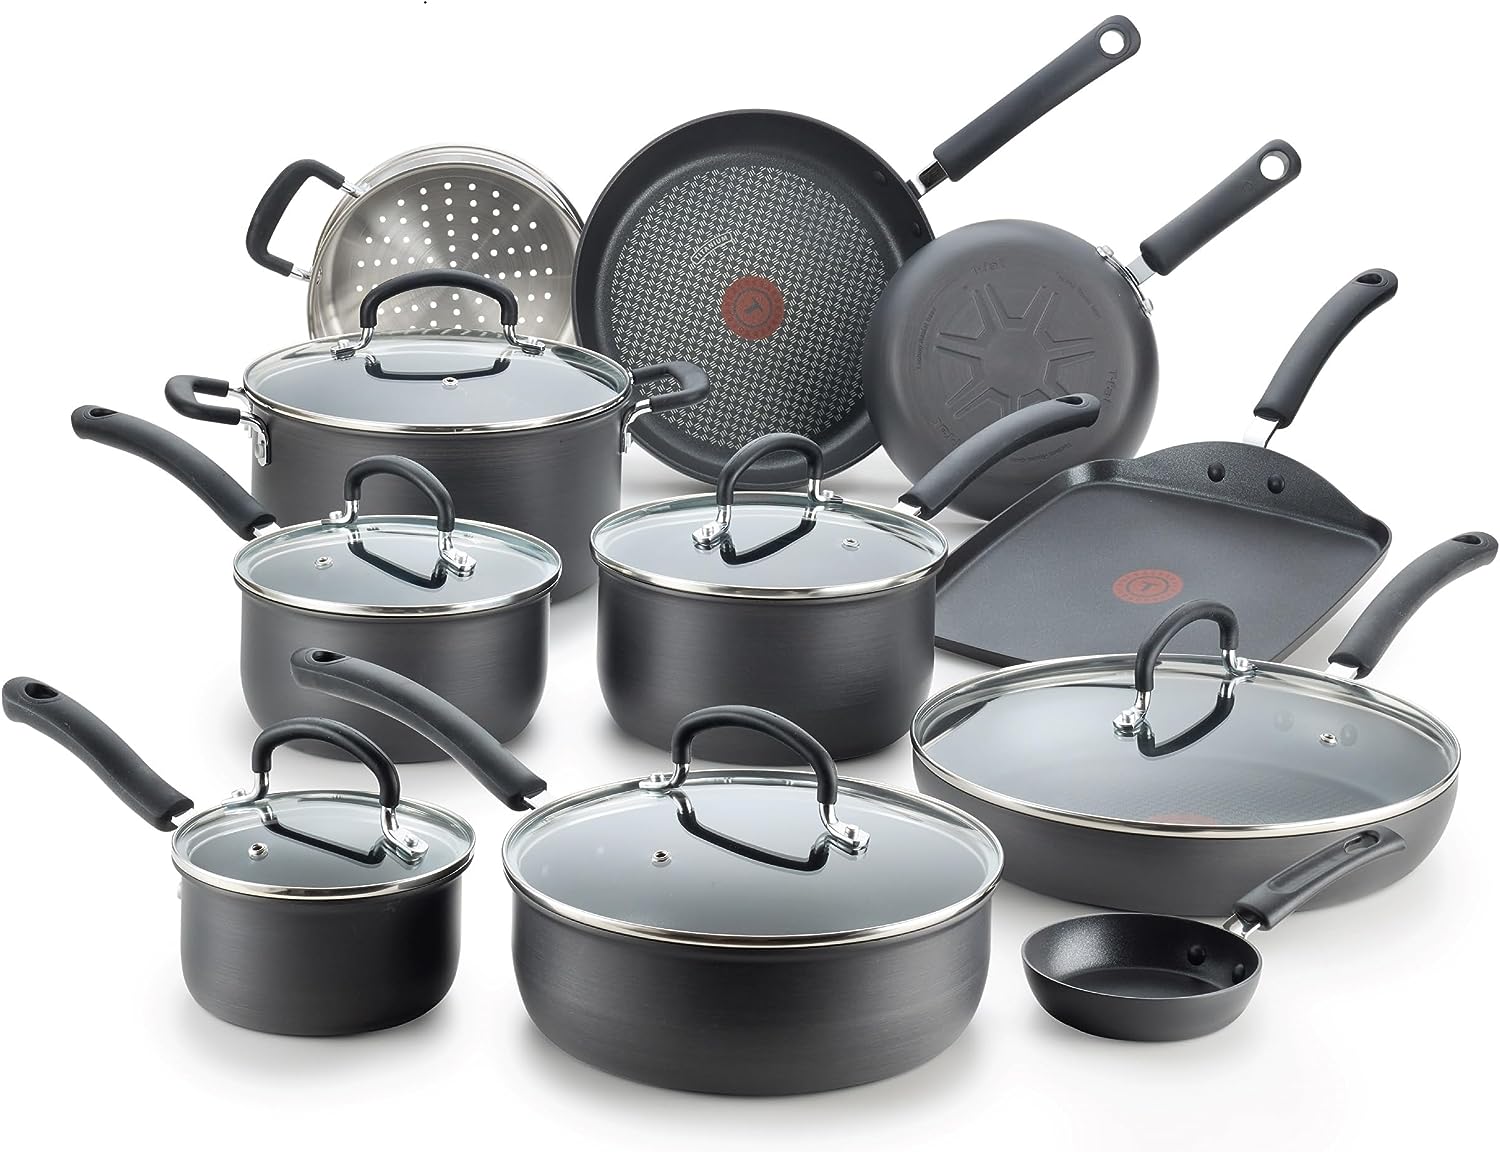 T-FAL ultimate hard anodized nonstick 17-piece cookware set in black